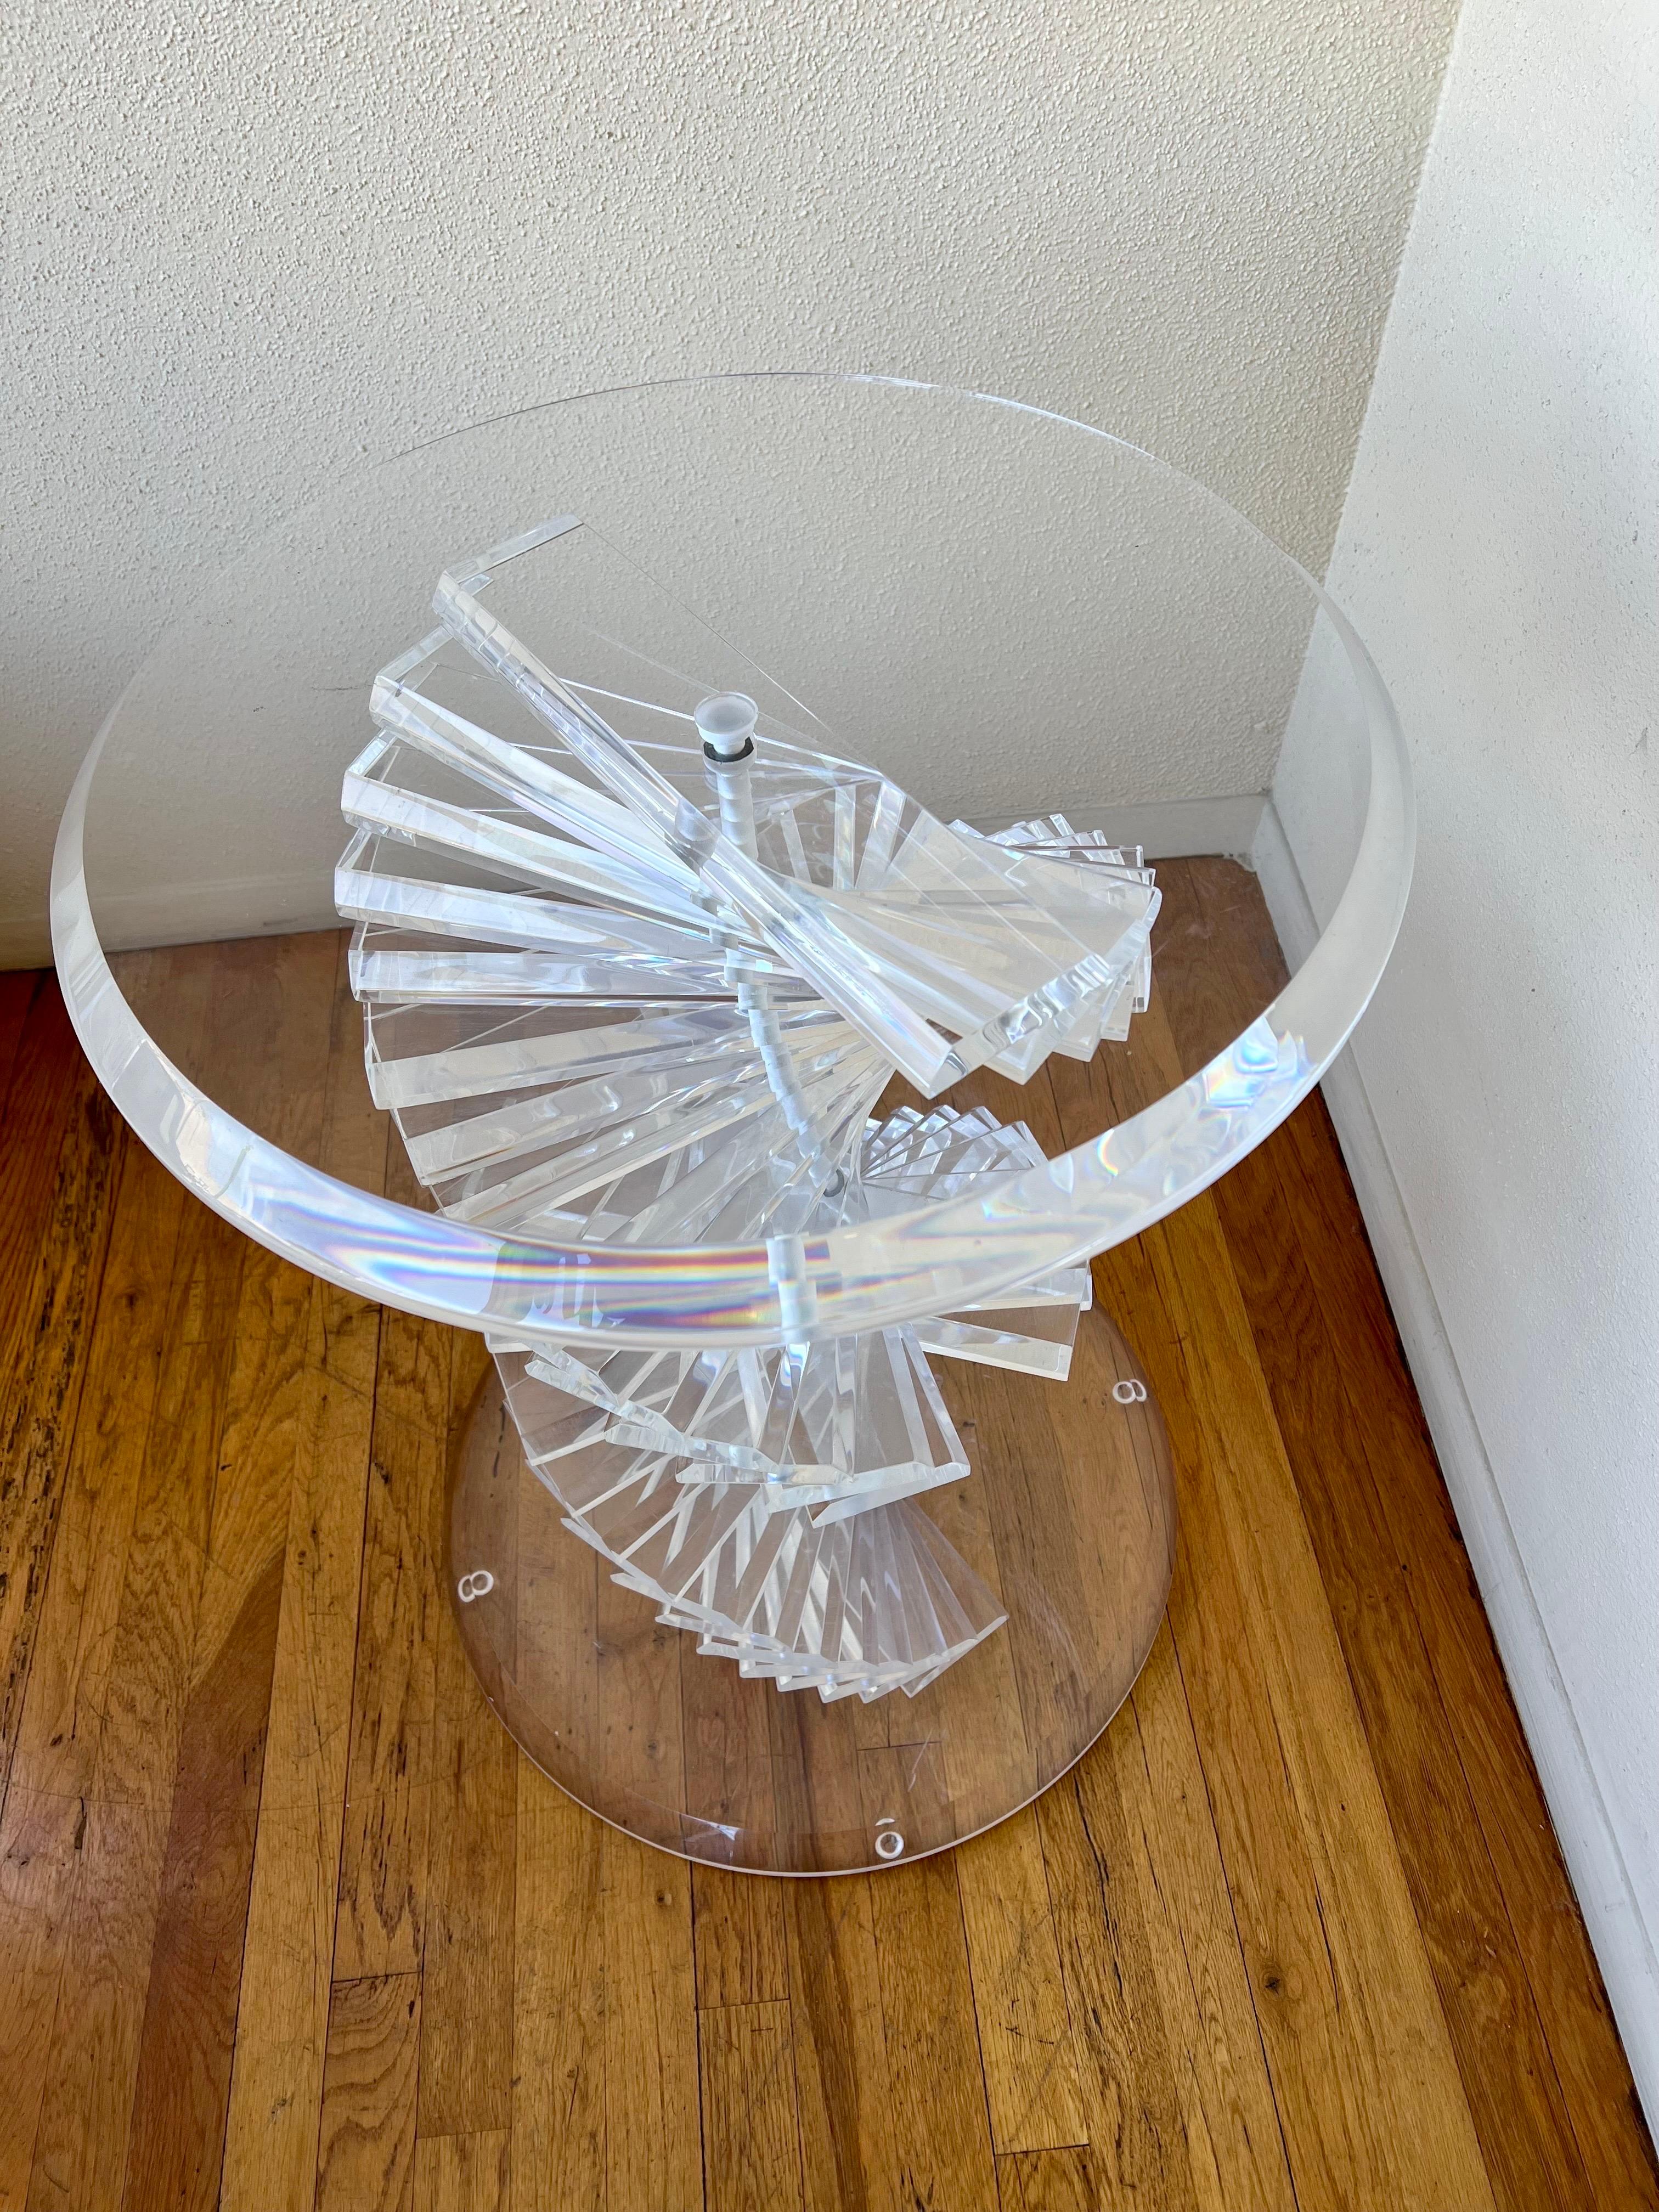 Striking Solid Thick Lucite Spiral Staircase Sculptural Table Dining Base In Excellent Condition For Sale In San Diego, CA